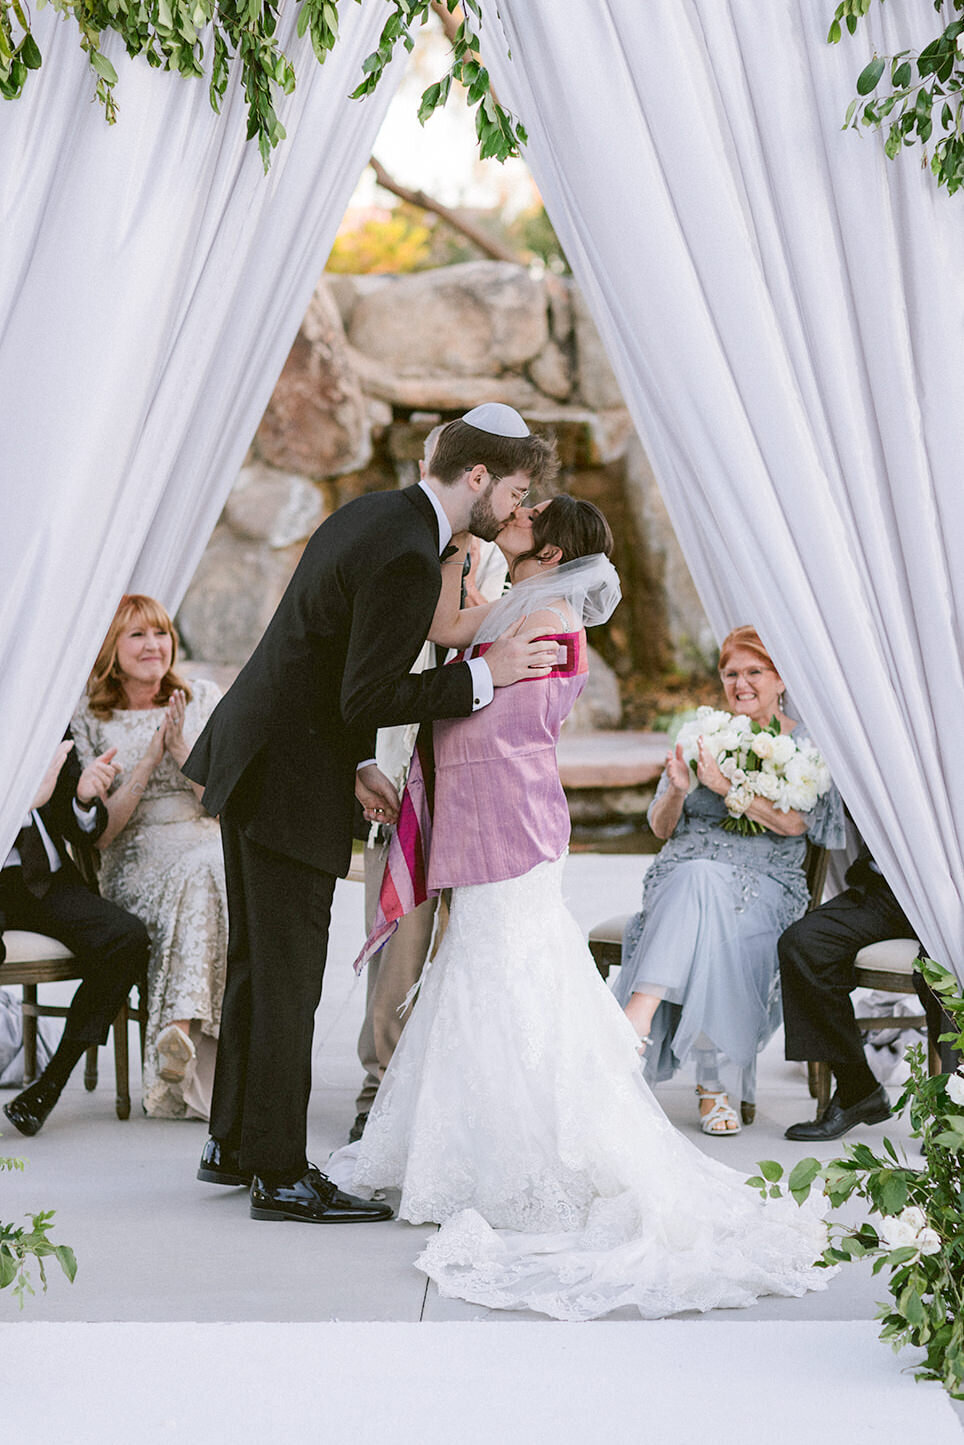 Soft and Romantic Wedding at Lotus House in Las Vegas - 44